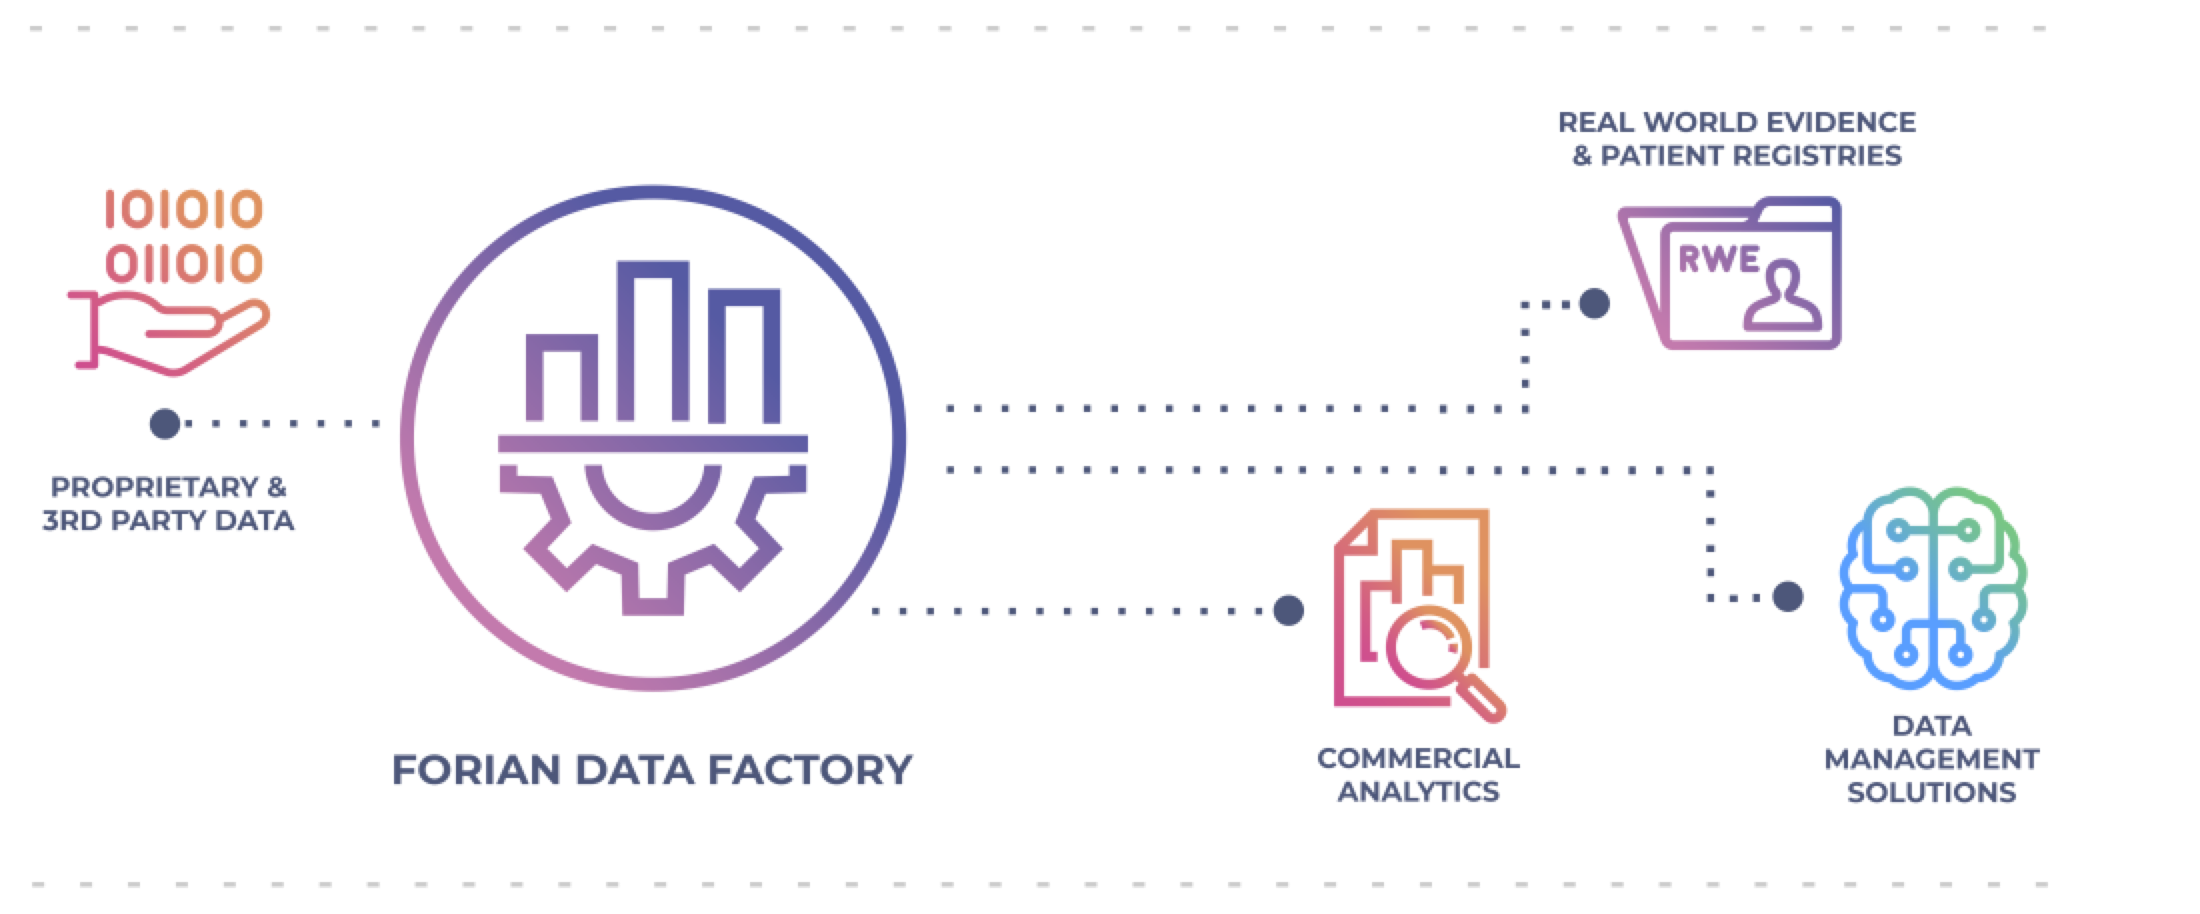 The Forian Data Factory uses standard and proprietary data to create biotrack & cannalytics, commercial analytics, real world evidence & patient registries, and data solutions.